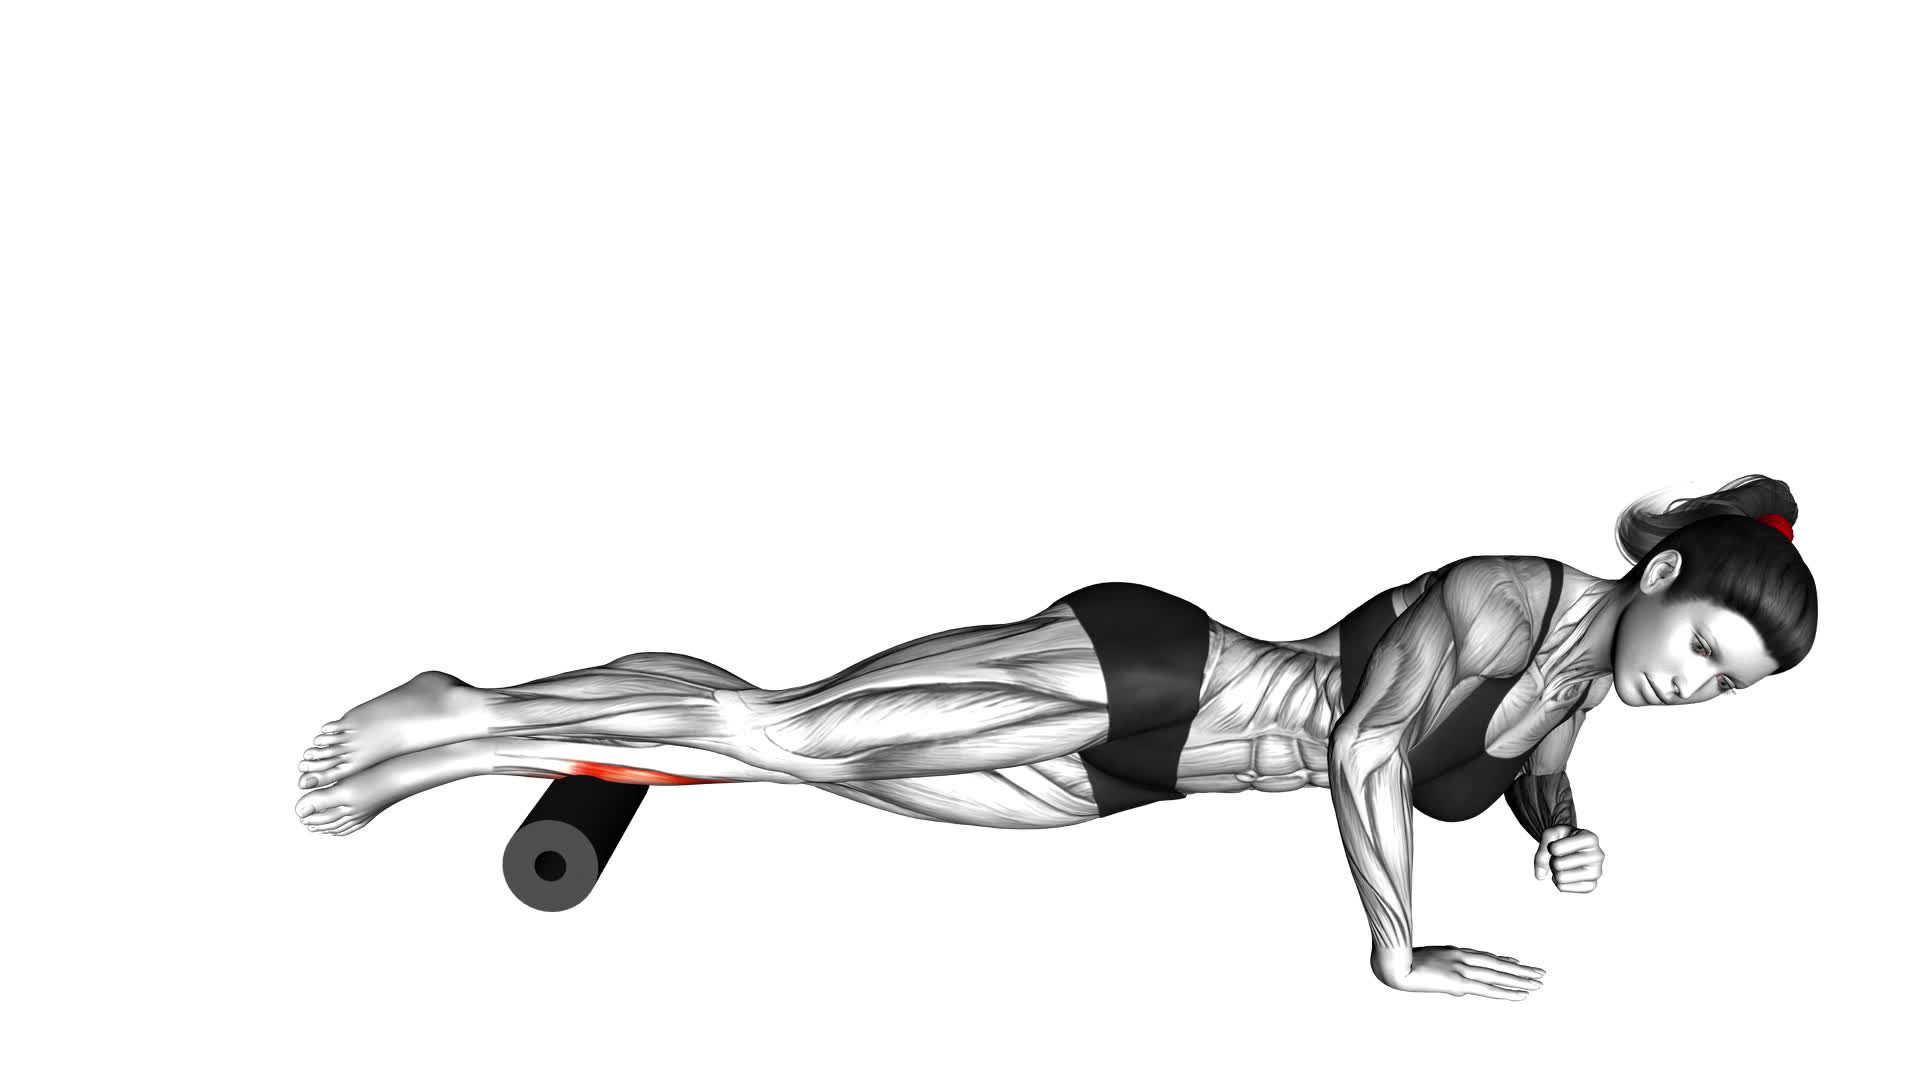 Roll Peroneal Side Lying on Floor (female) - Video Exercise Guide & Tips